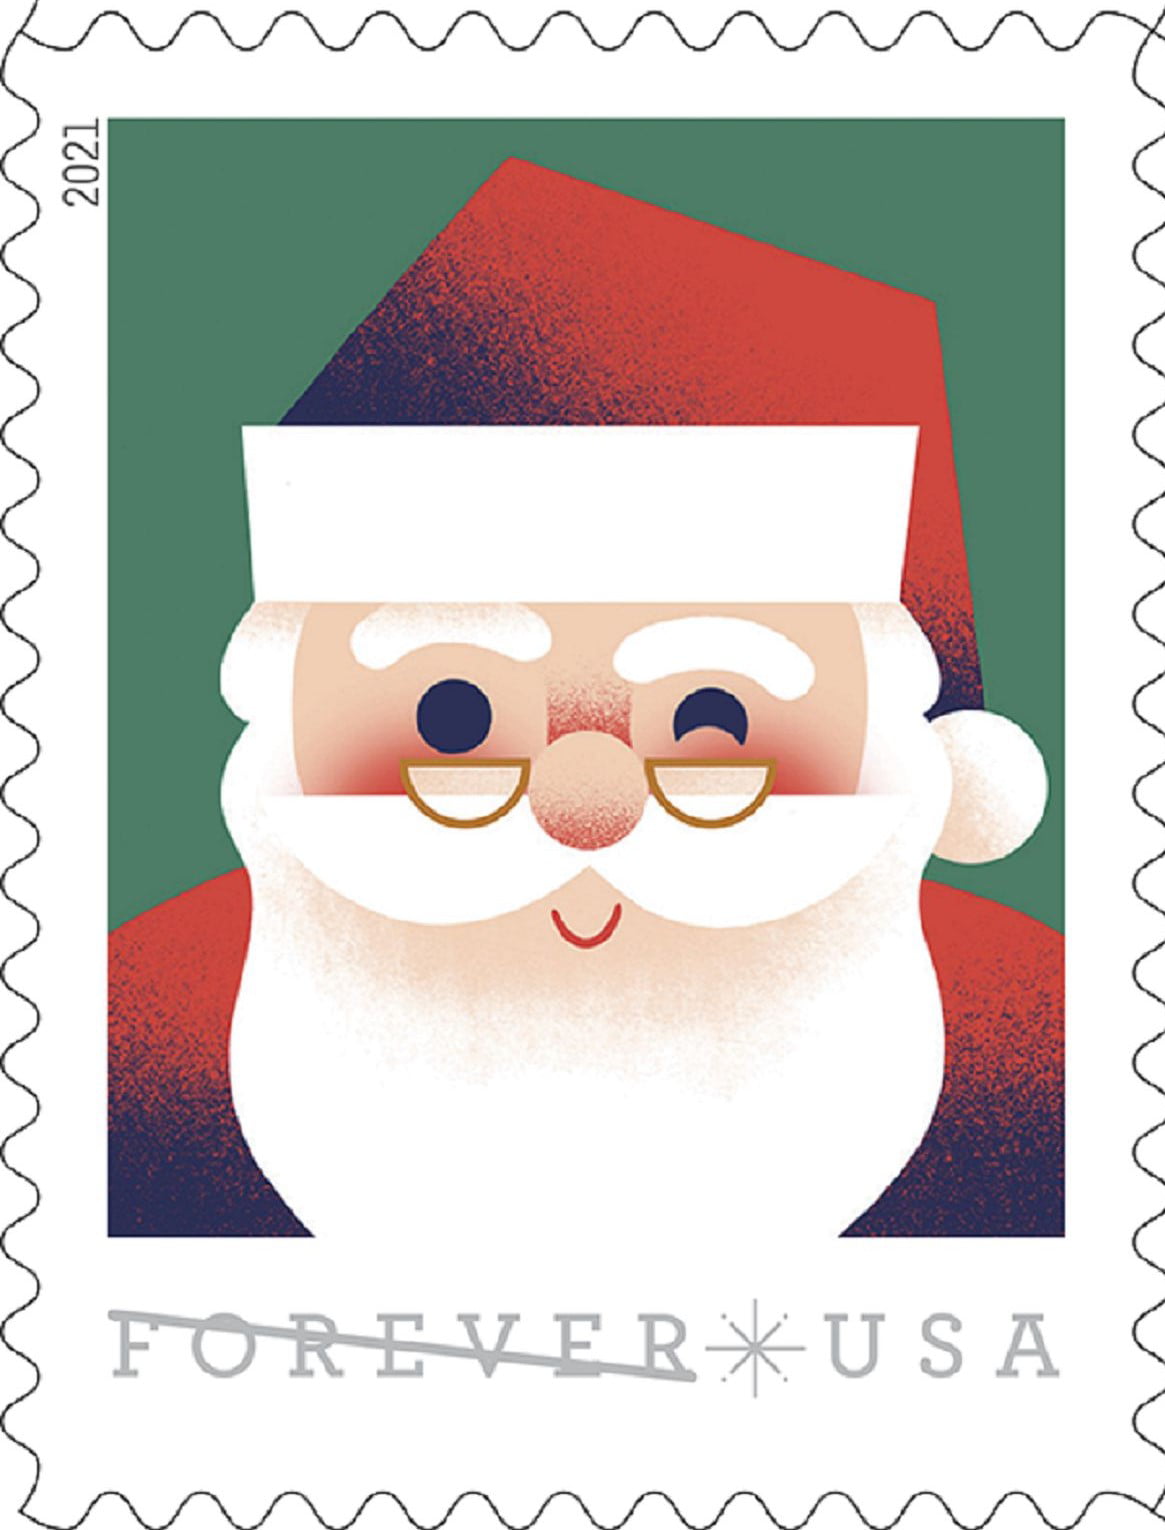 USPS A Visit from St Nick Book of 20 Forever First Class Postage Stamps (5  Booklets (100 Stamps))